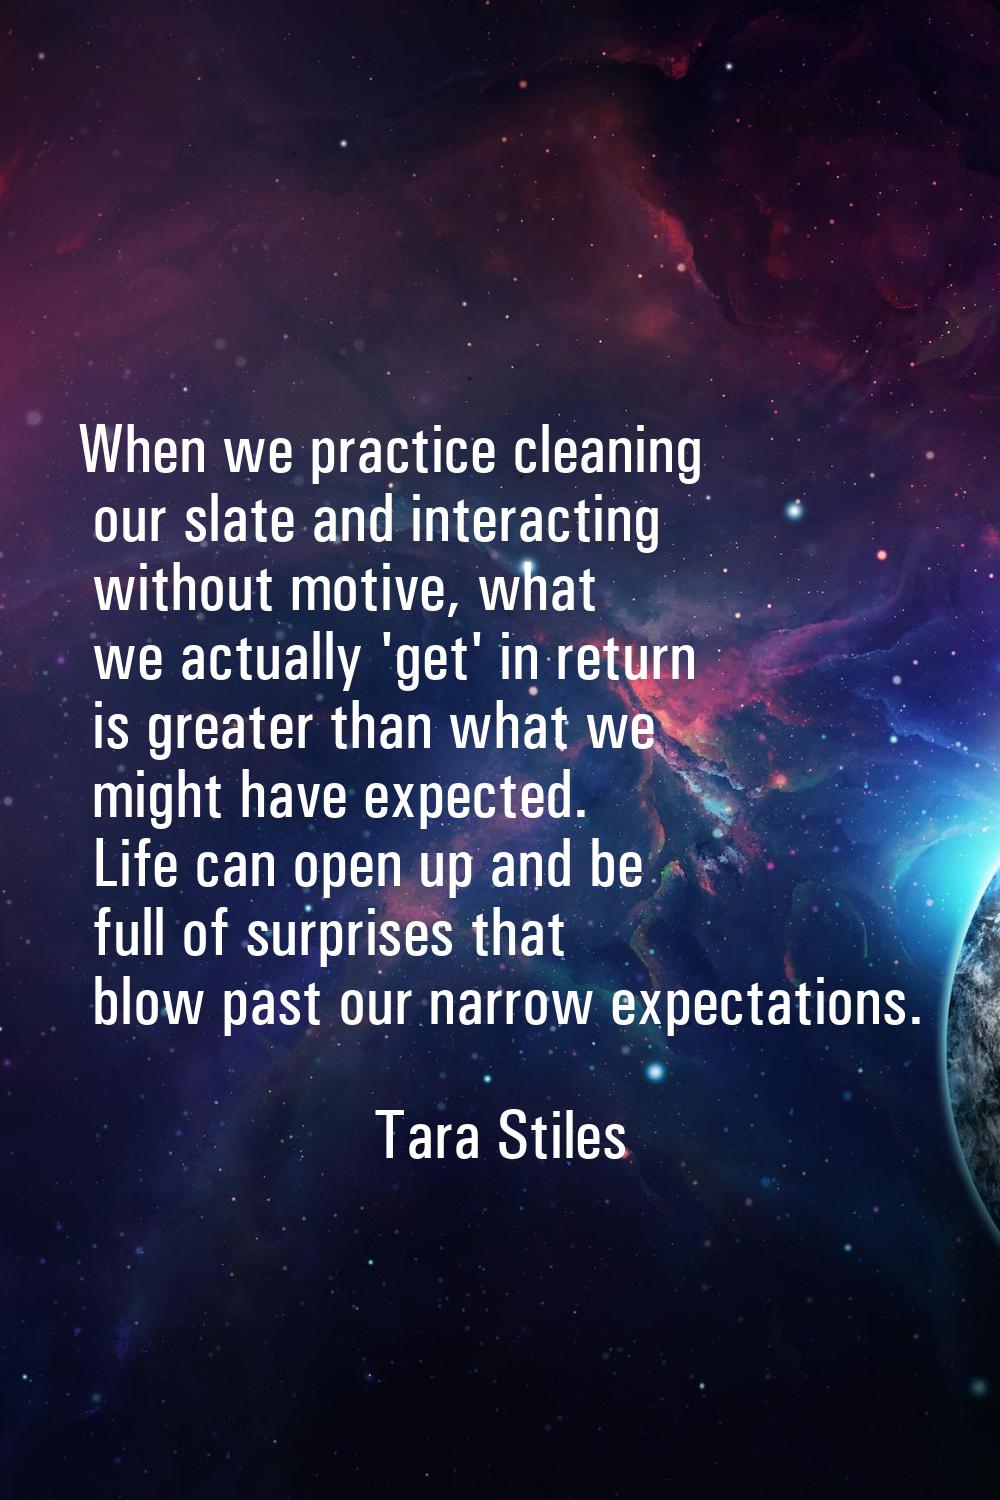 When we practice cleaning our slate and interacting without motive, what we actually 'get' in retur